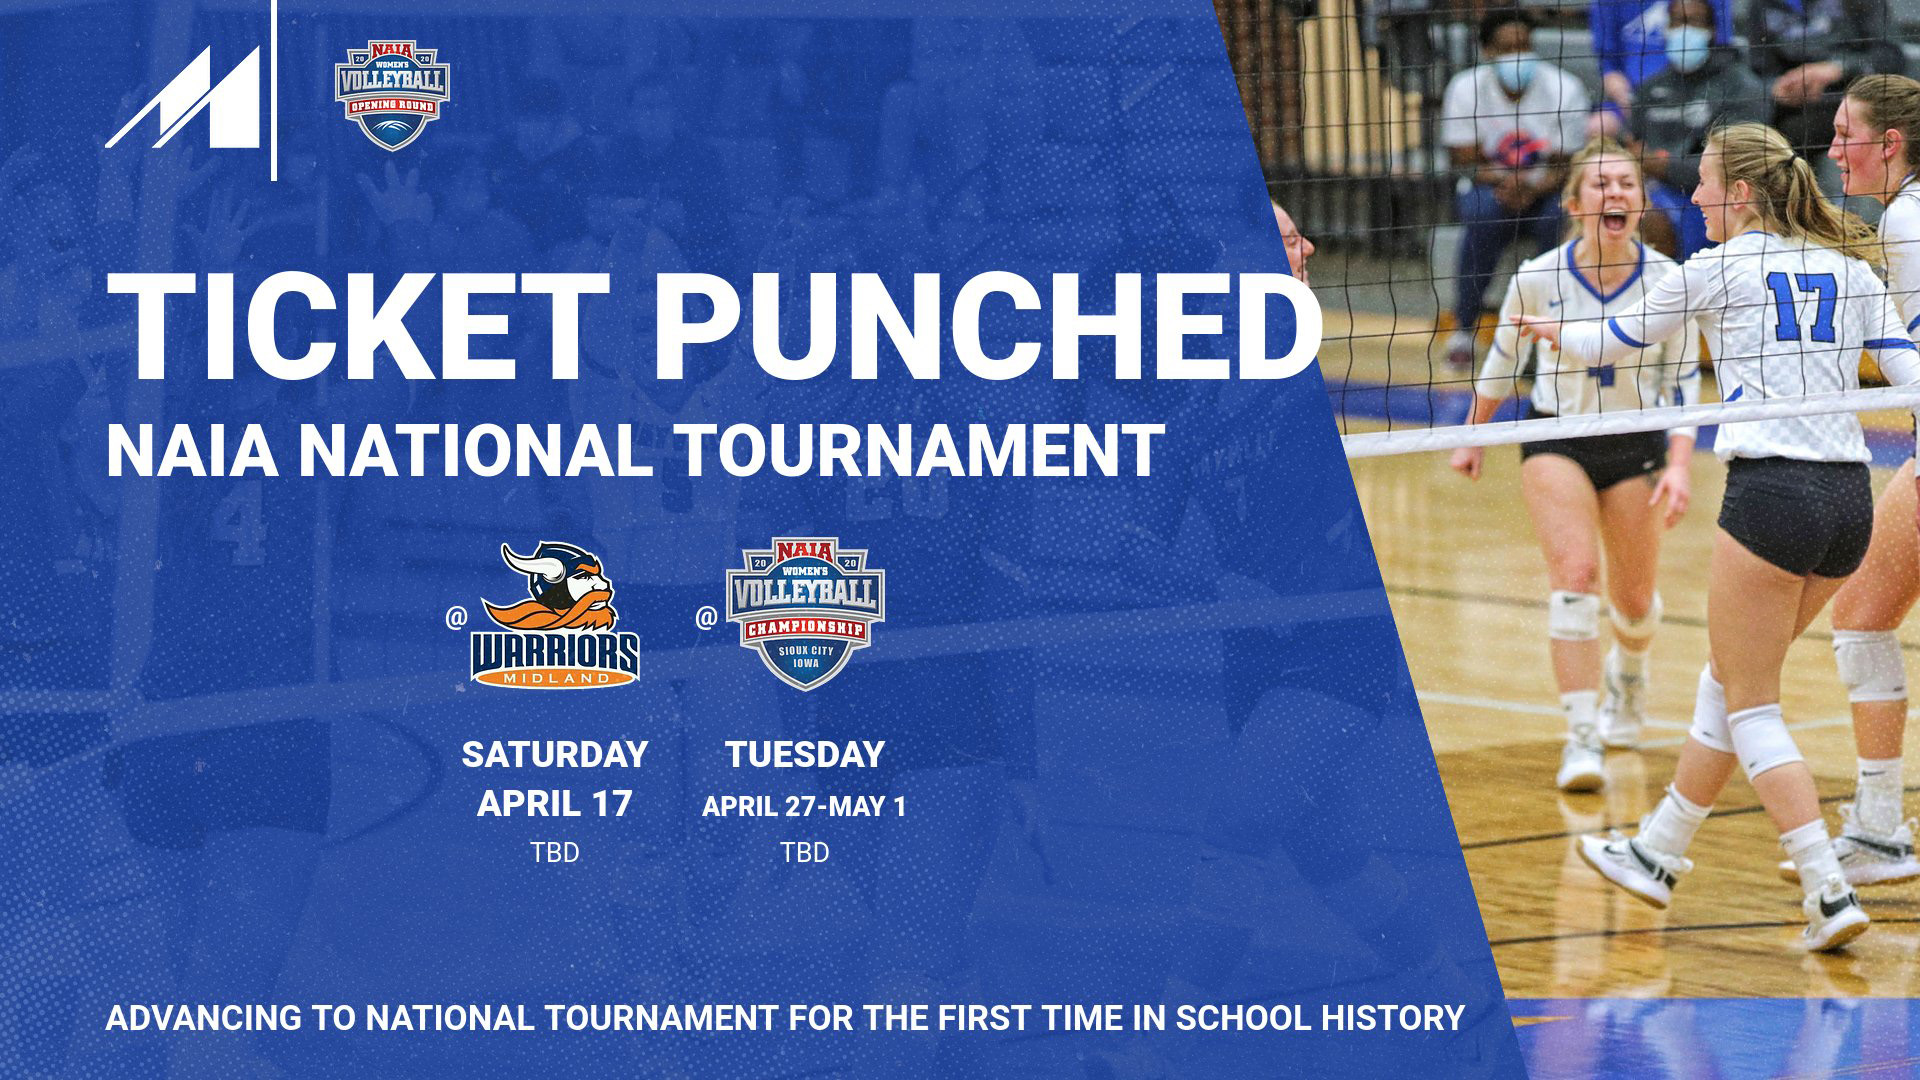 ticket punched.jpg